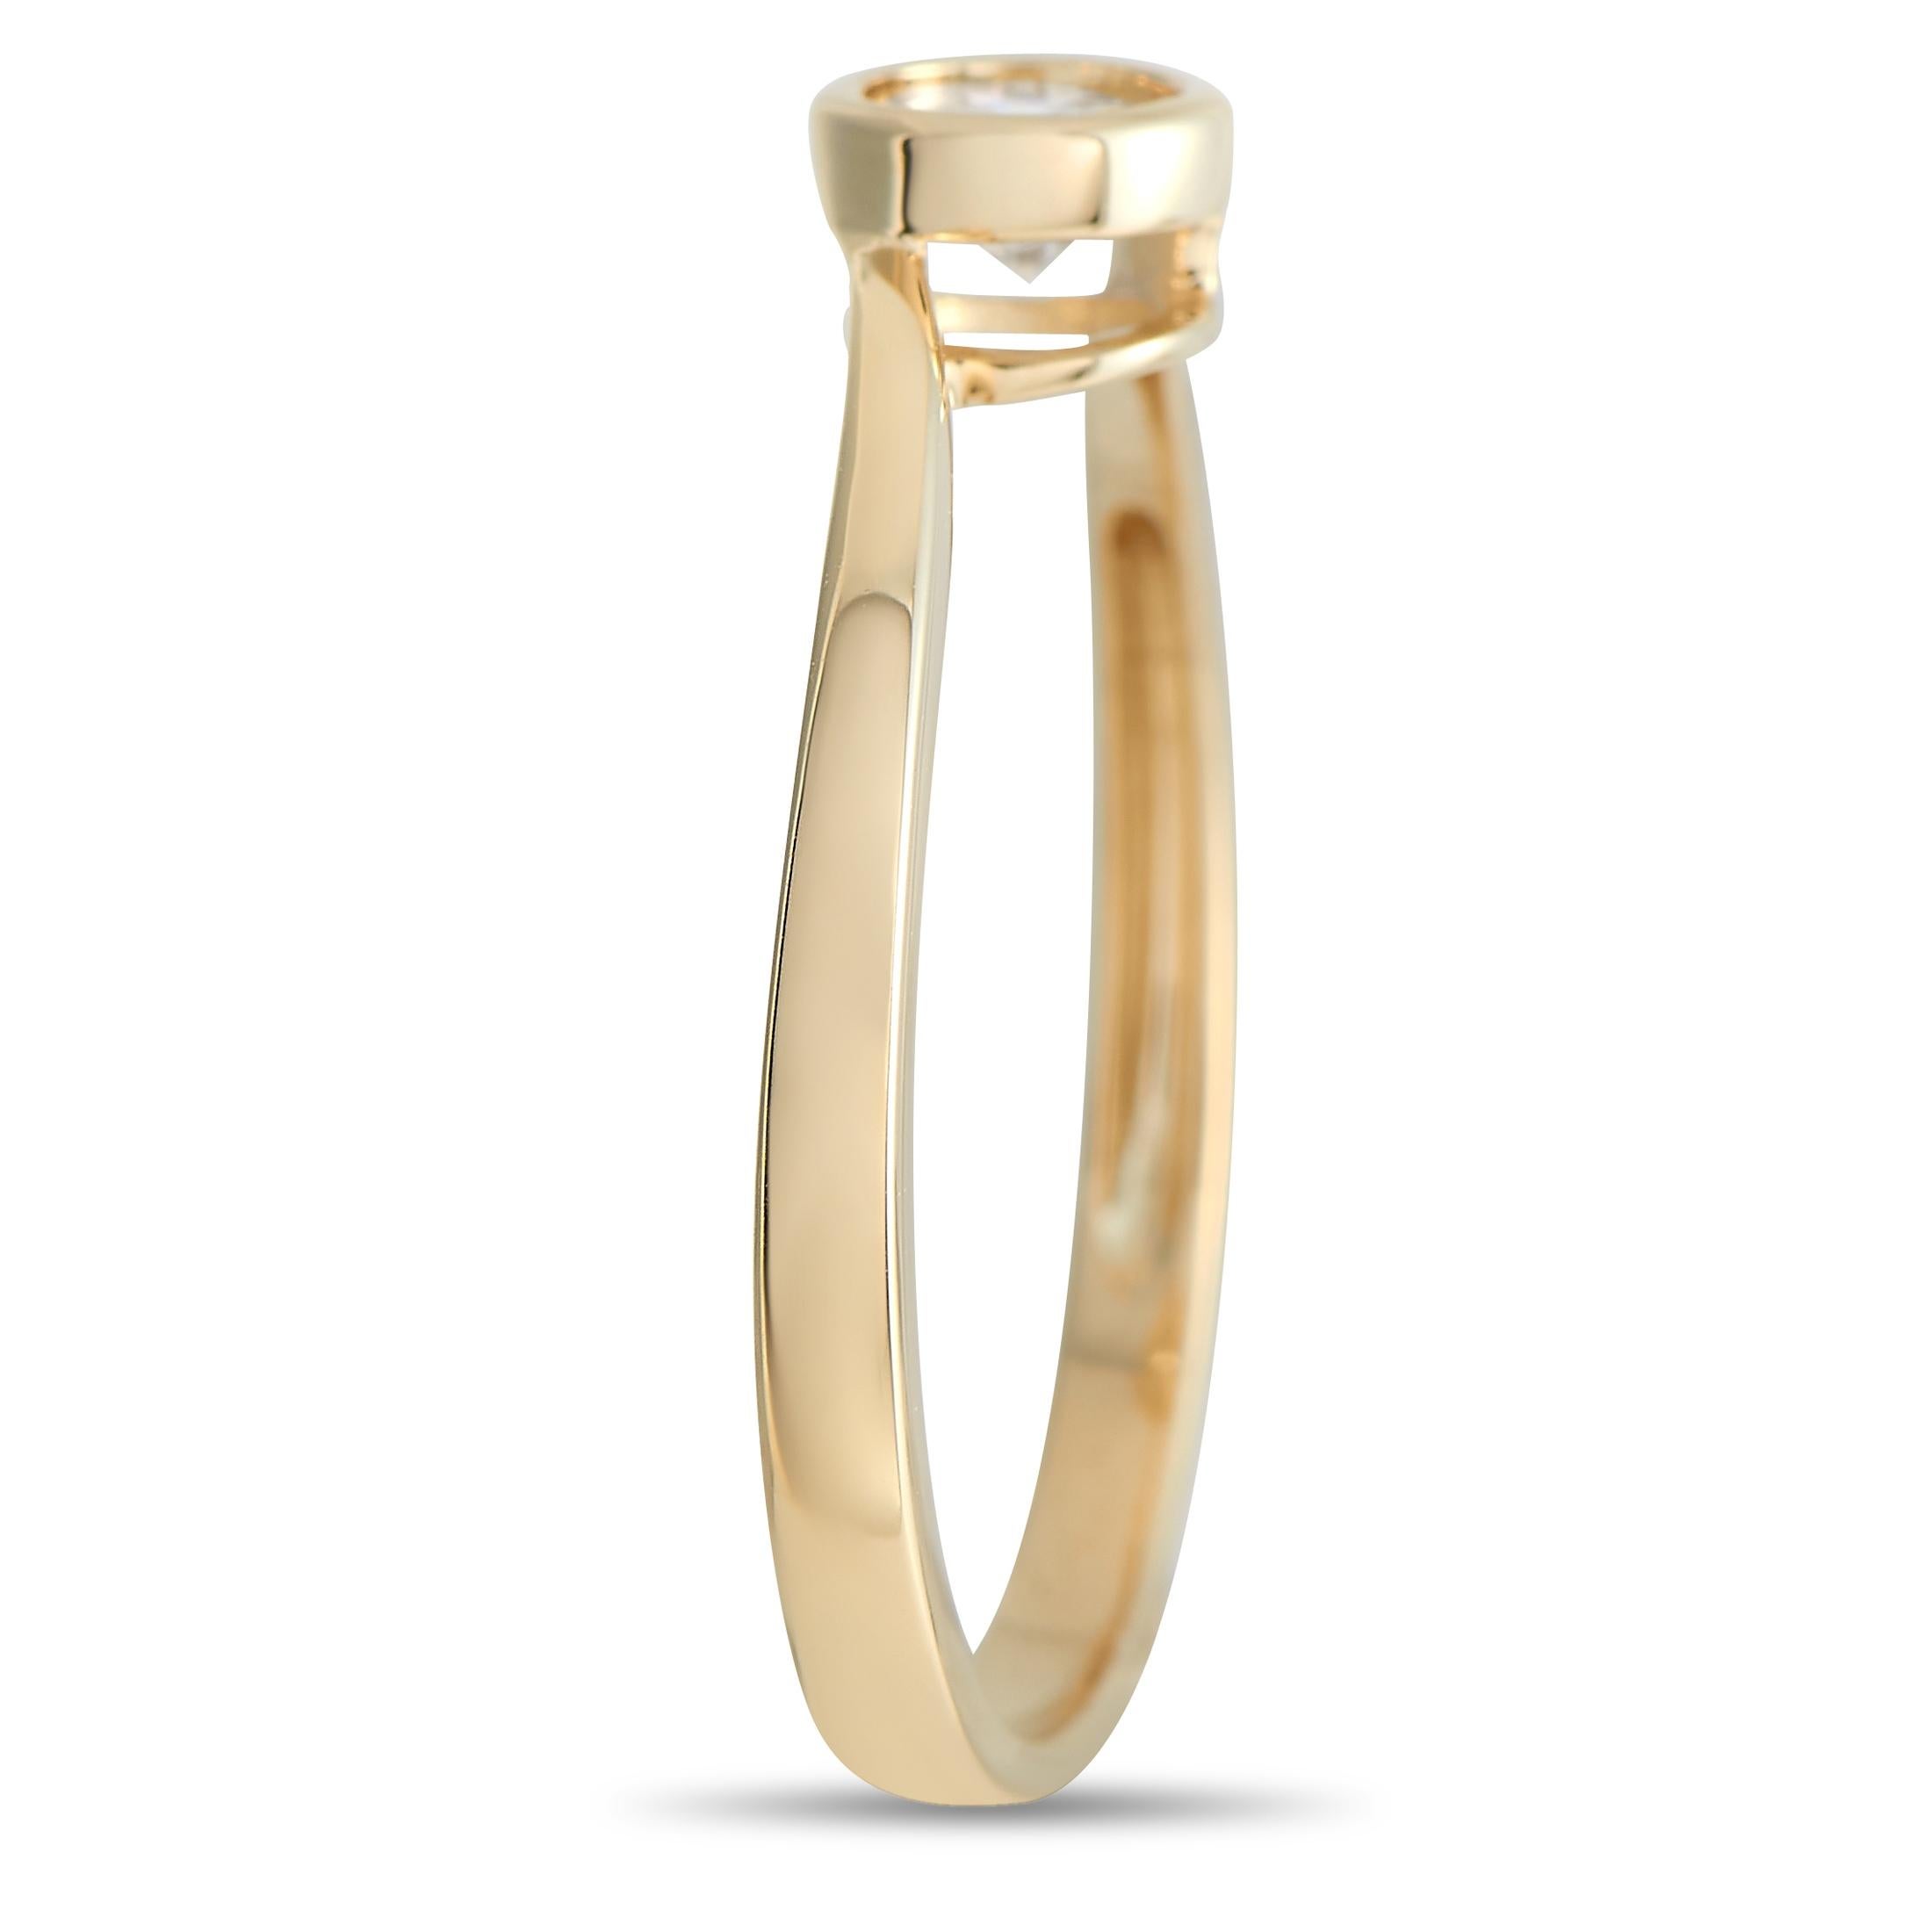 This pretty LB Exclusive 14K Yellow Gold 0.26 ct Diamond Solitaire Ring is a classic. The band is made with 18K Yellow Gold and bezel-set with a 0.26 carat round cut diamond. The ring has a band thickness of 2 mm, a top height of 3 mm, and top